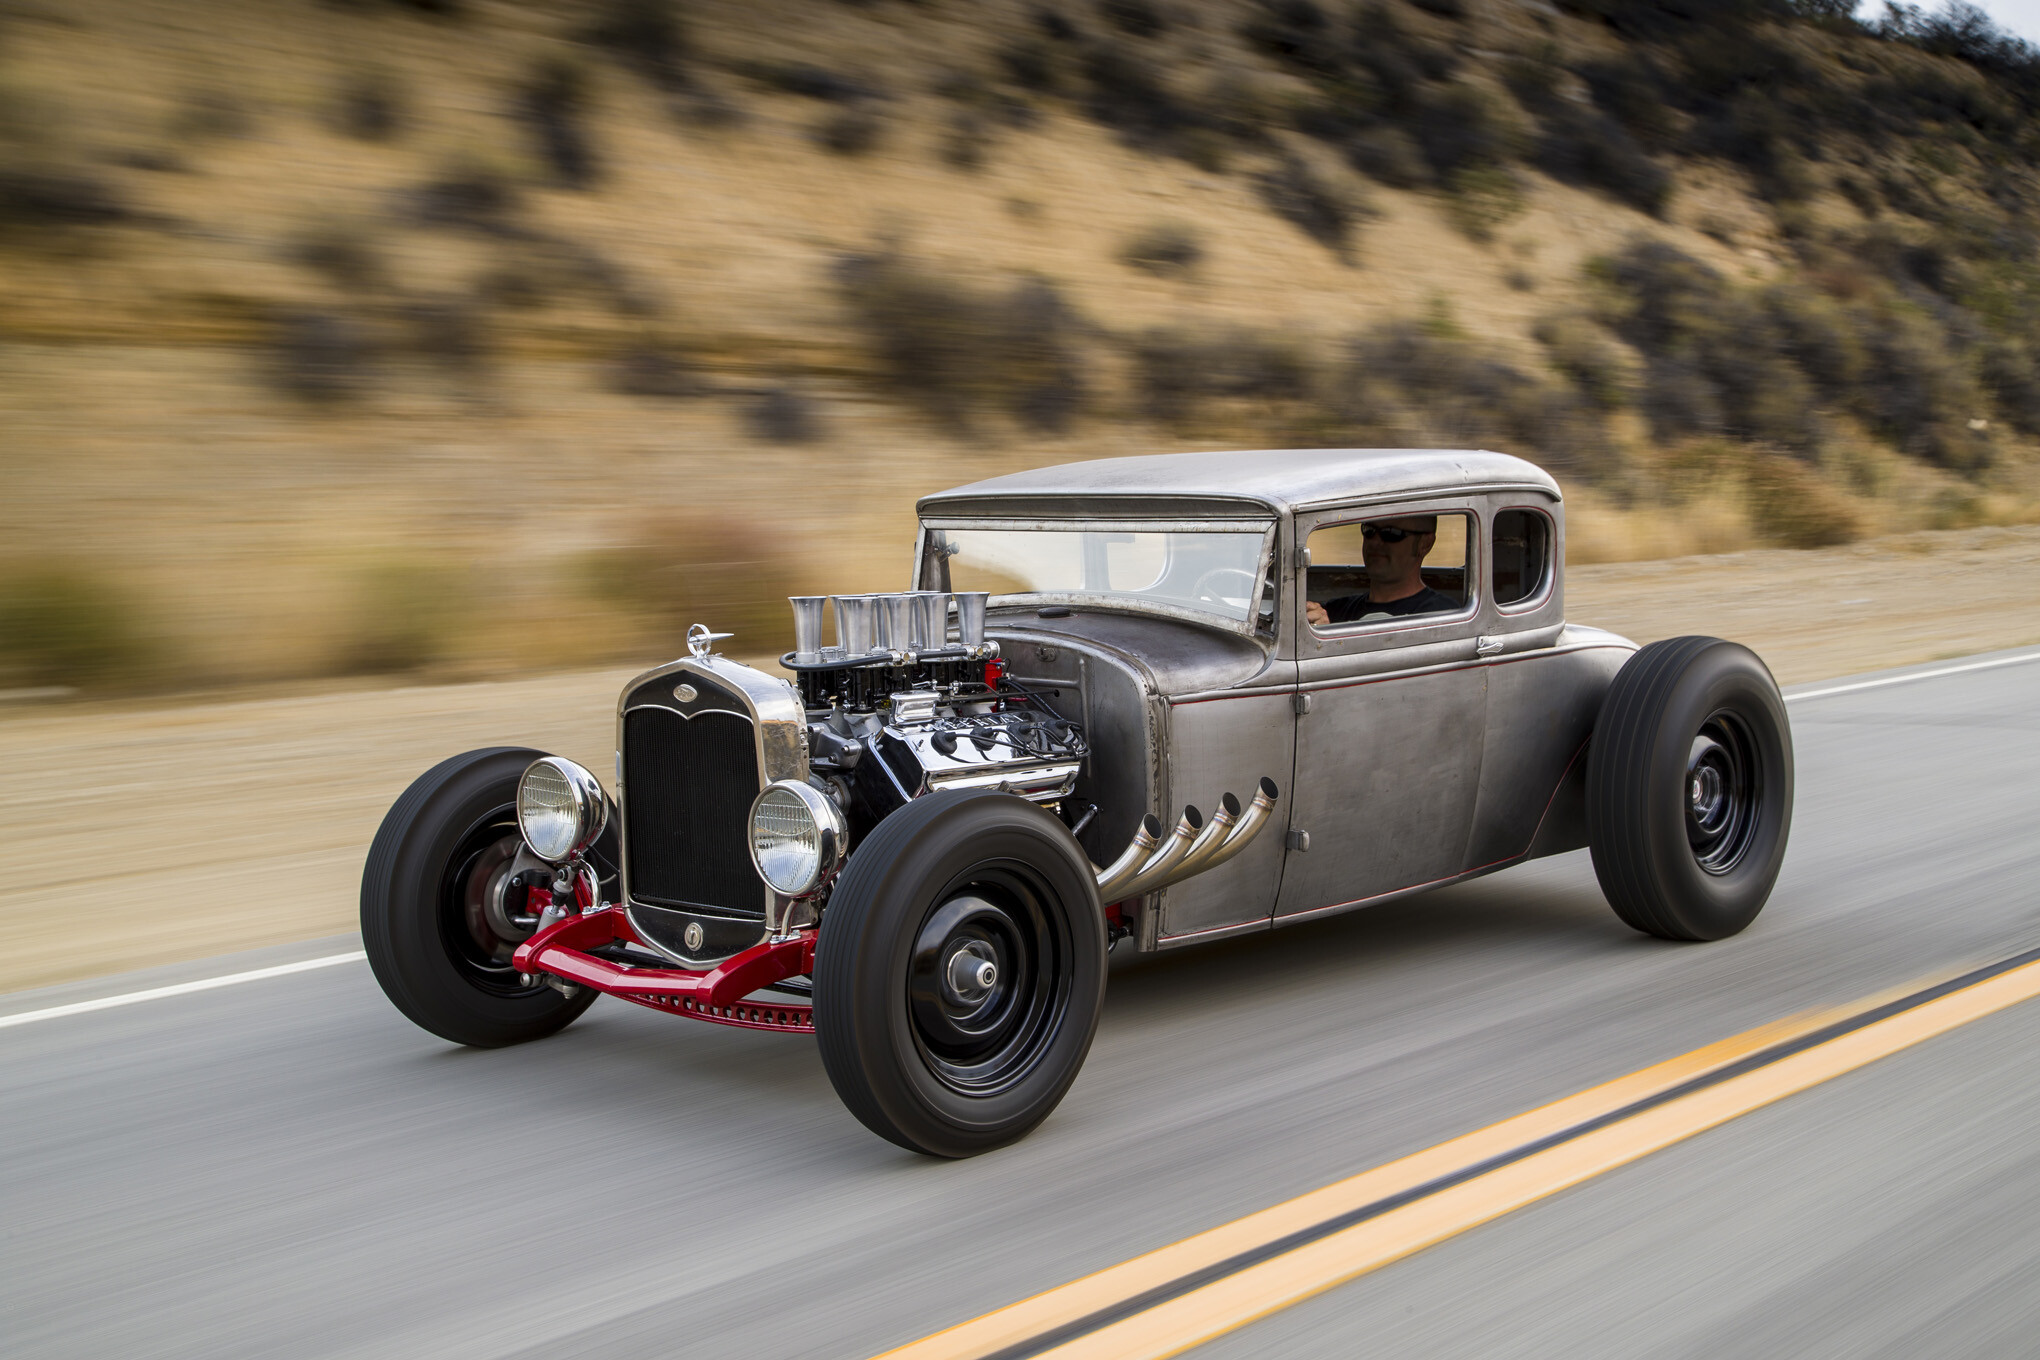 Hot Rod: A classic American car with an oversized engine modified for speed, Vehicles, Chevrolet. 2040x1360 HD Wallpaper.